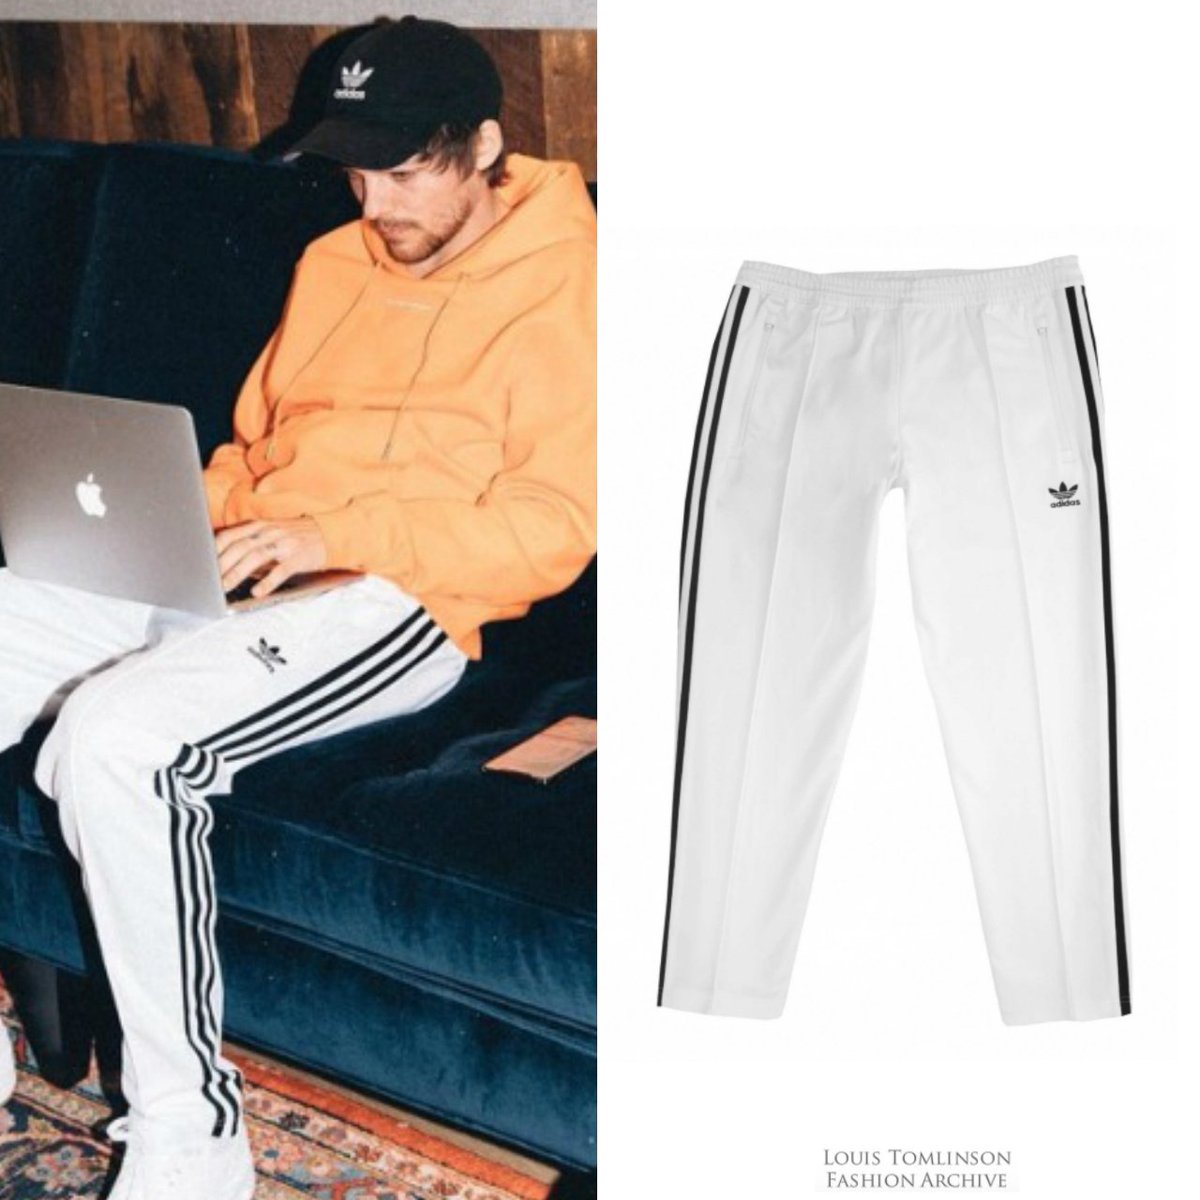 Louis Tomlinson Fashion Archive on Twitter: | Louis wore @adidas BB track pants on https://t.co/lazdqk7Dx5 https://t.co/Mezv7Eh4ge" / Twitter